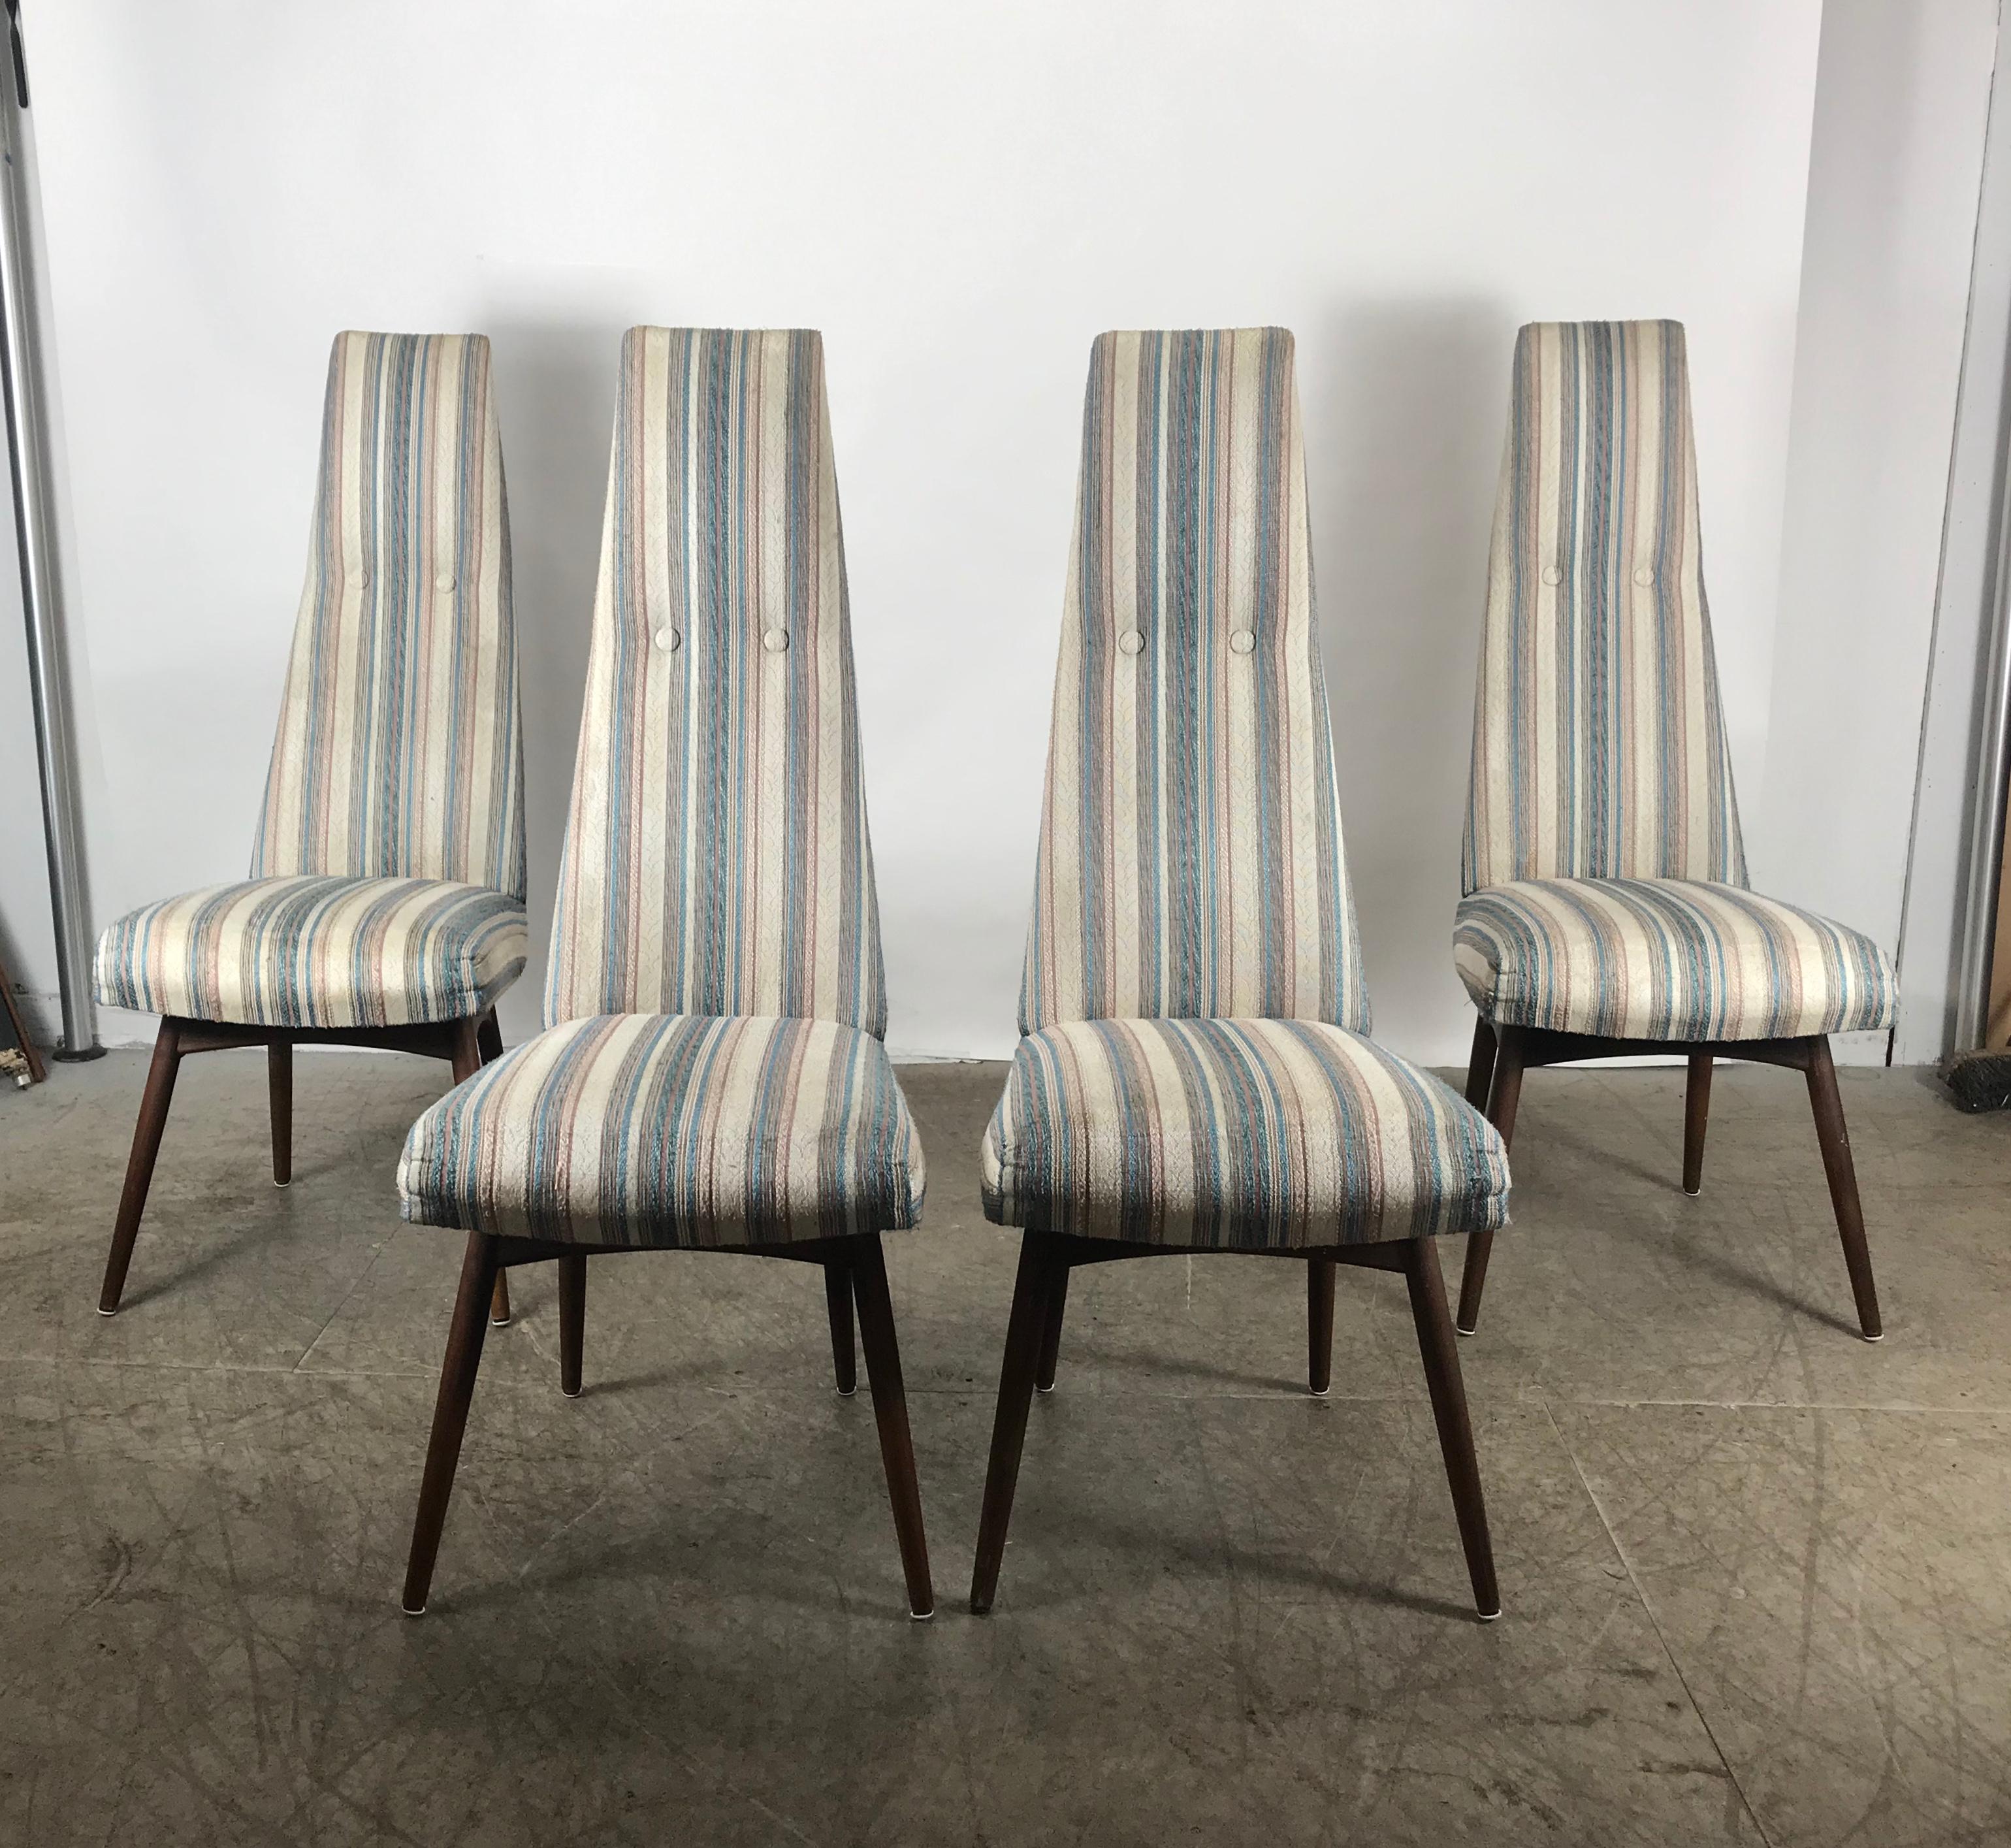 This gorgeous set of four vintage modern dining chairs feature an unusual high backrest ensuring maximum comfort. Stylish design with splayed and tapered walnut legs adding to the allure. Retain original wool fabric upholstery in nice original